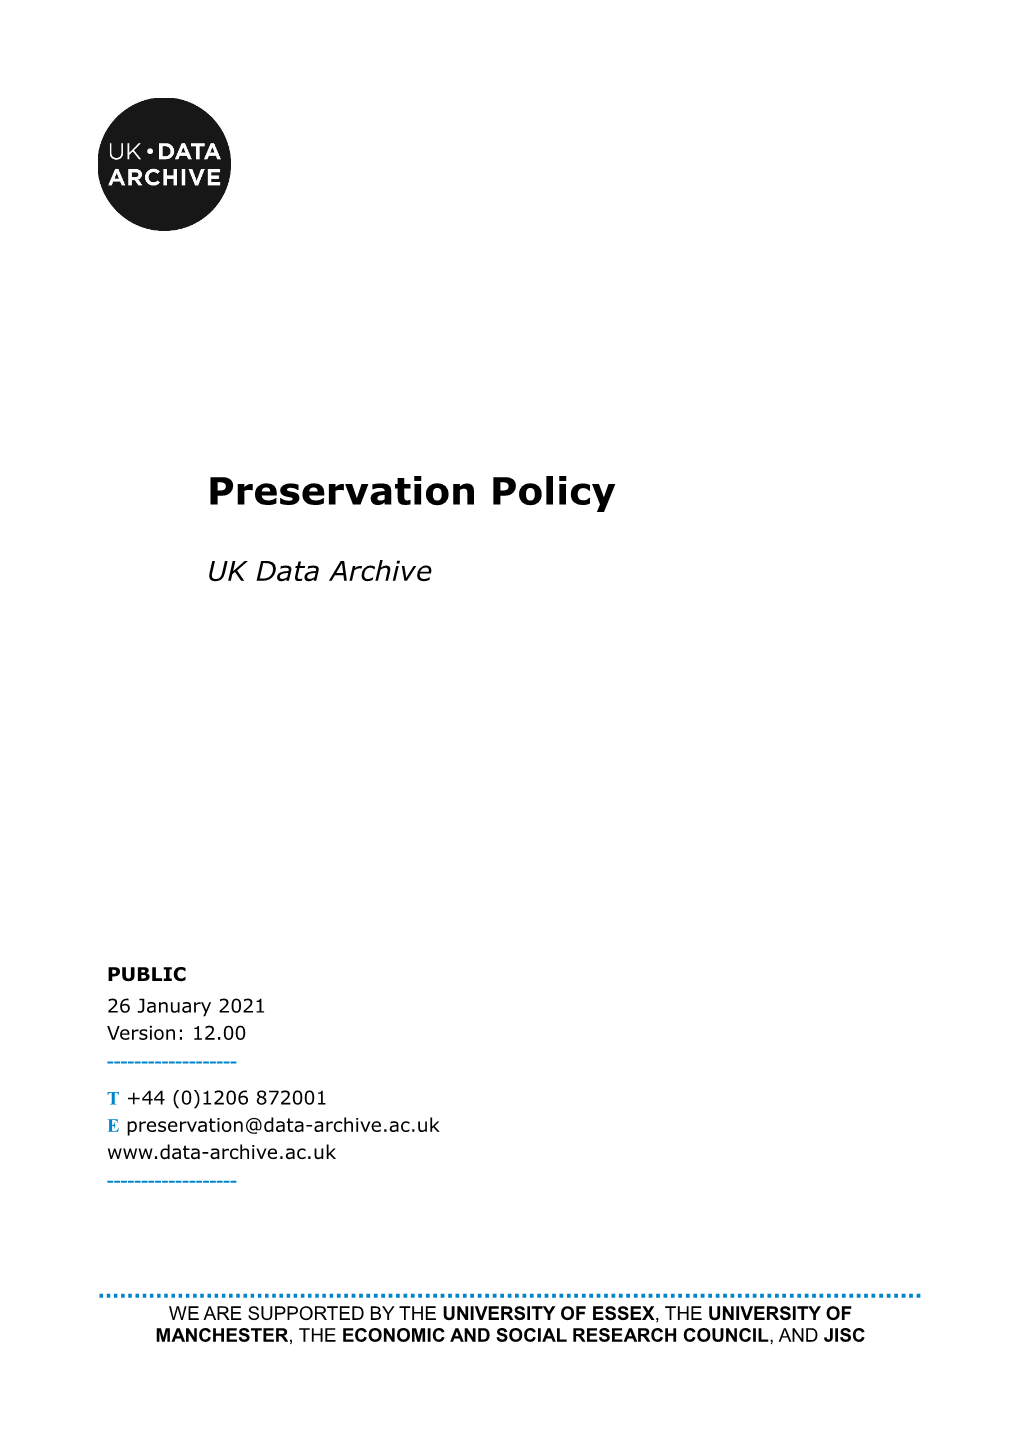 UK Data Archive Preservation Policy